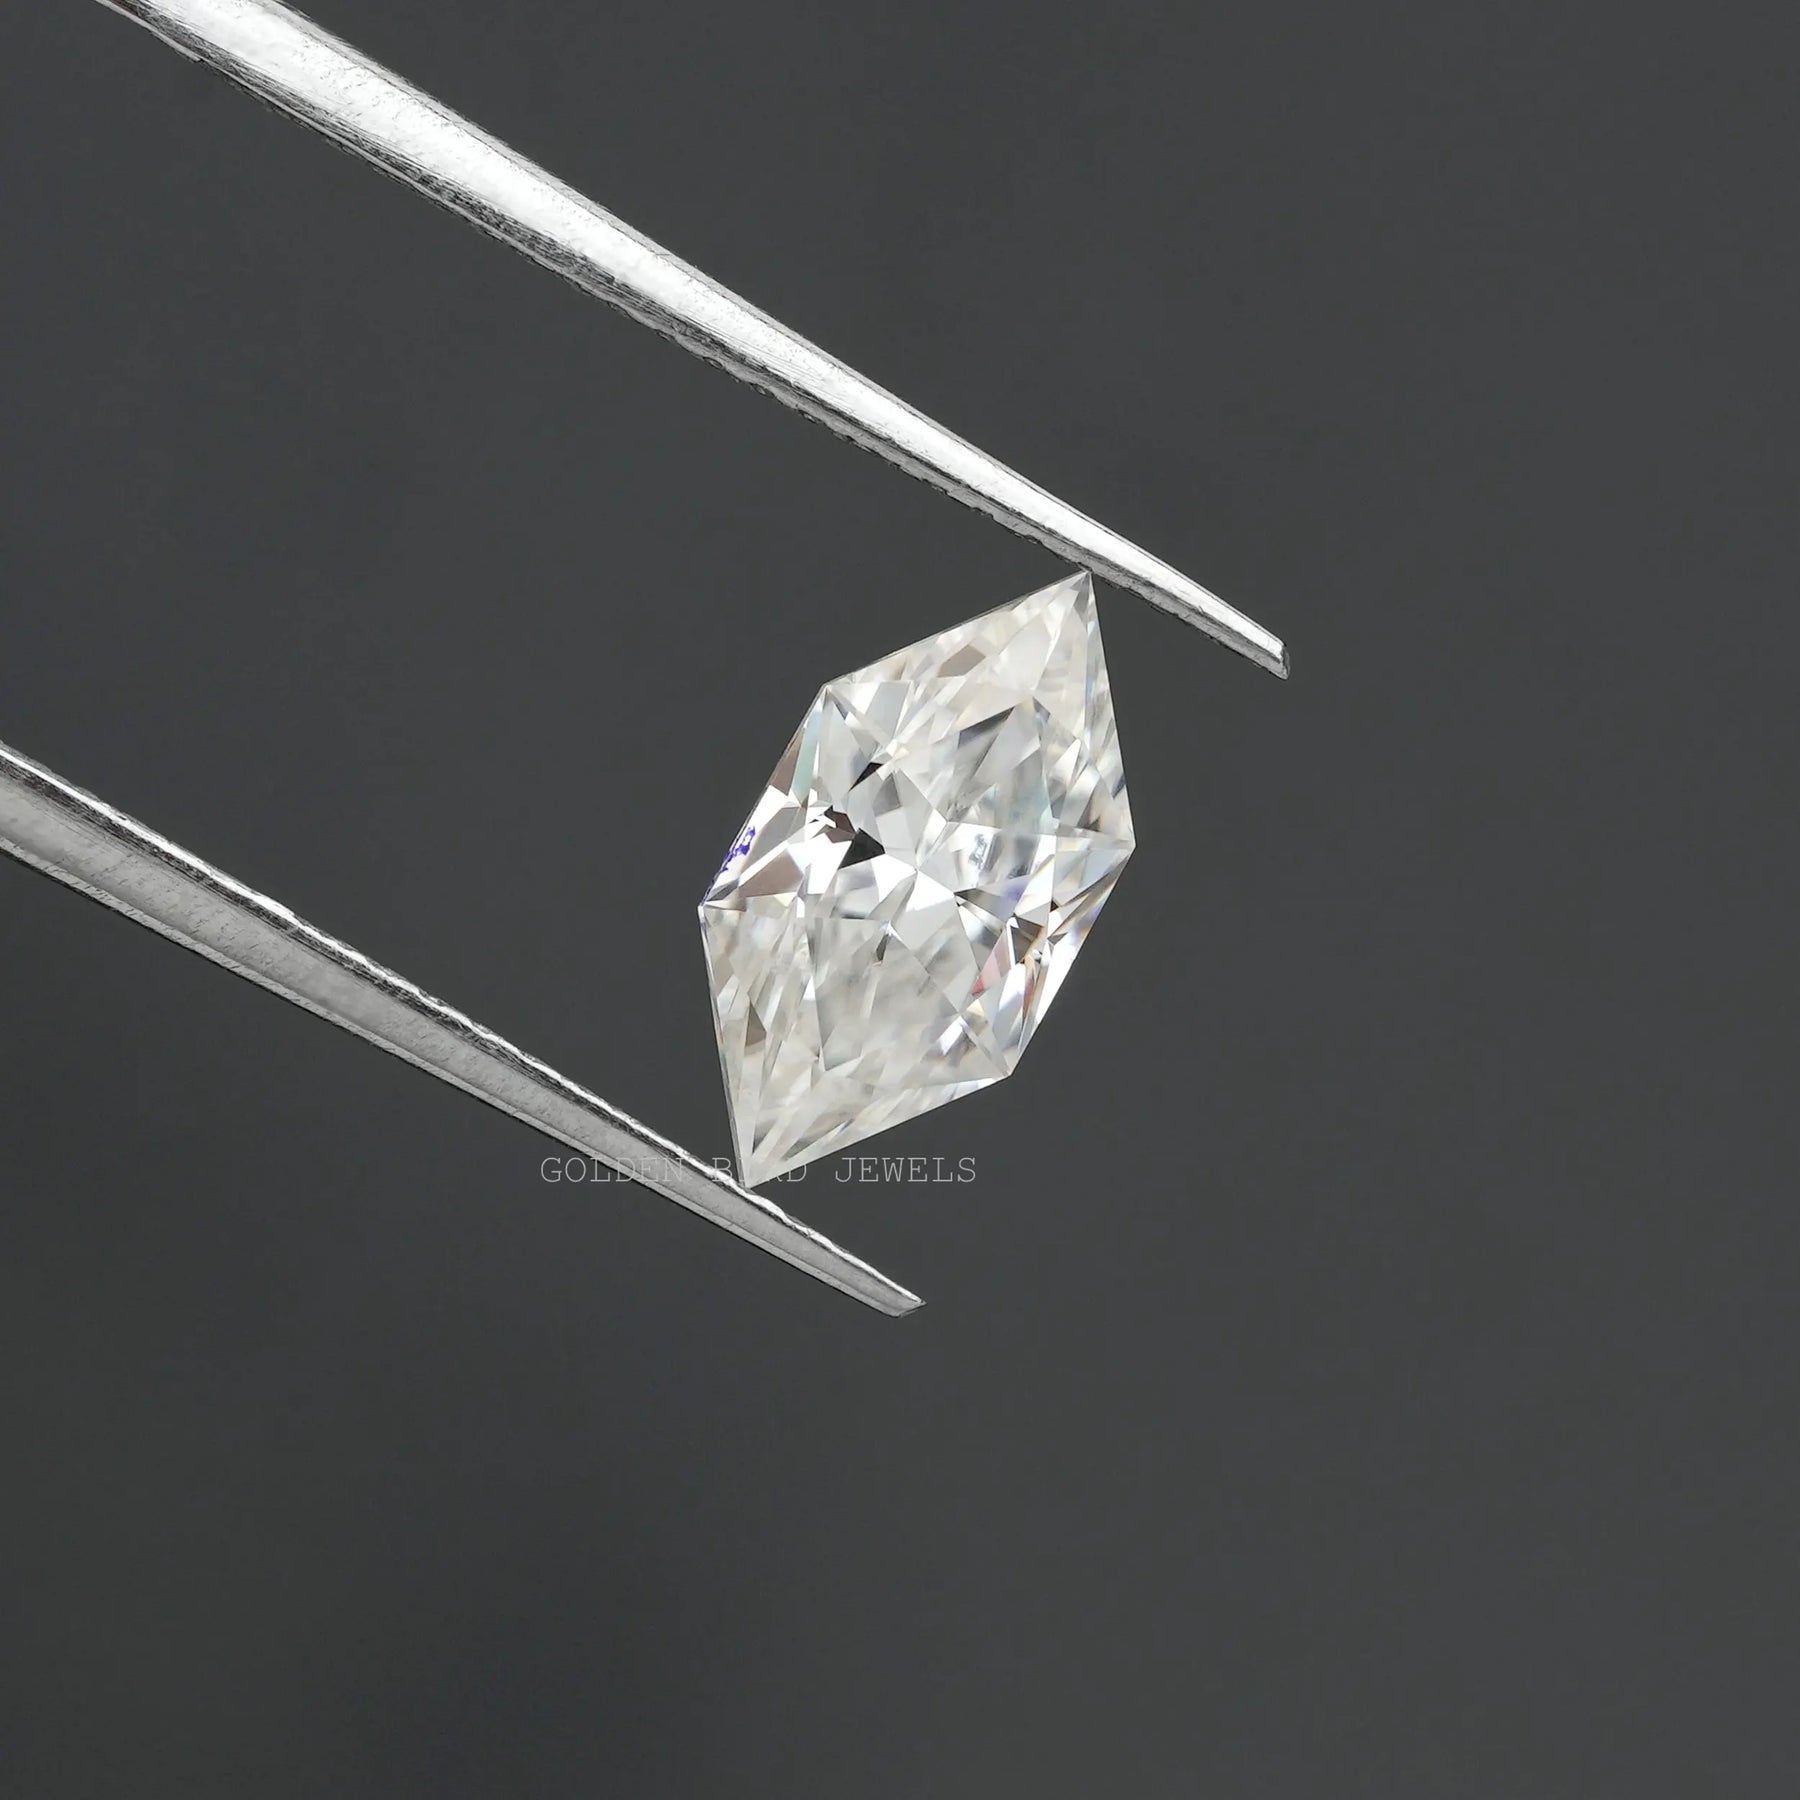 In tweezer look of Excellent Cut Dutch Marquise Cut Moissanite Stone